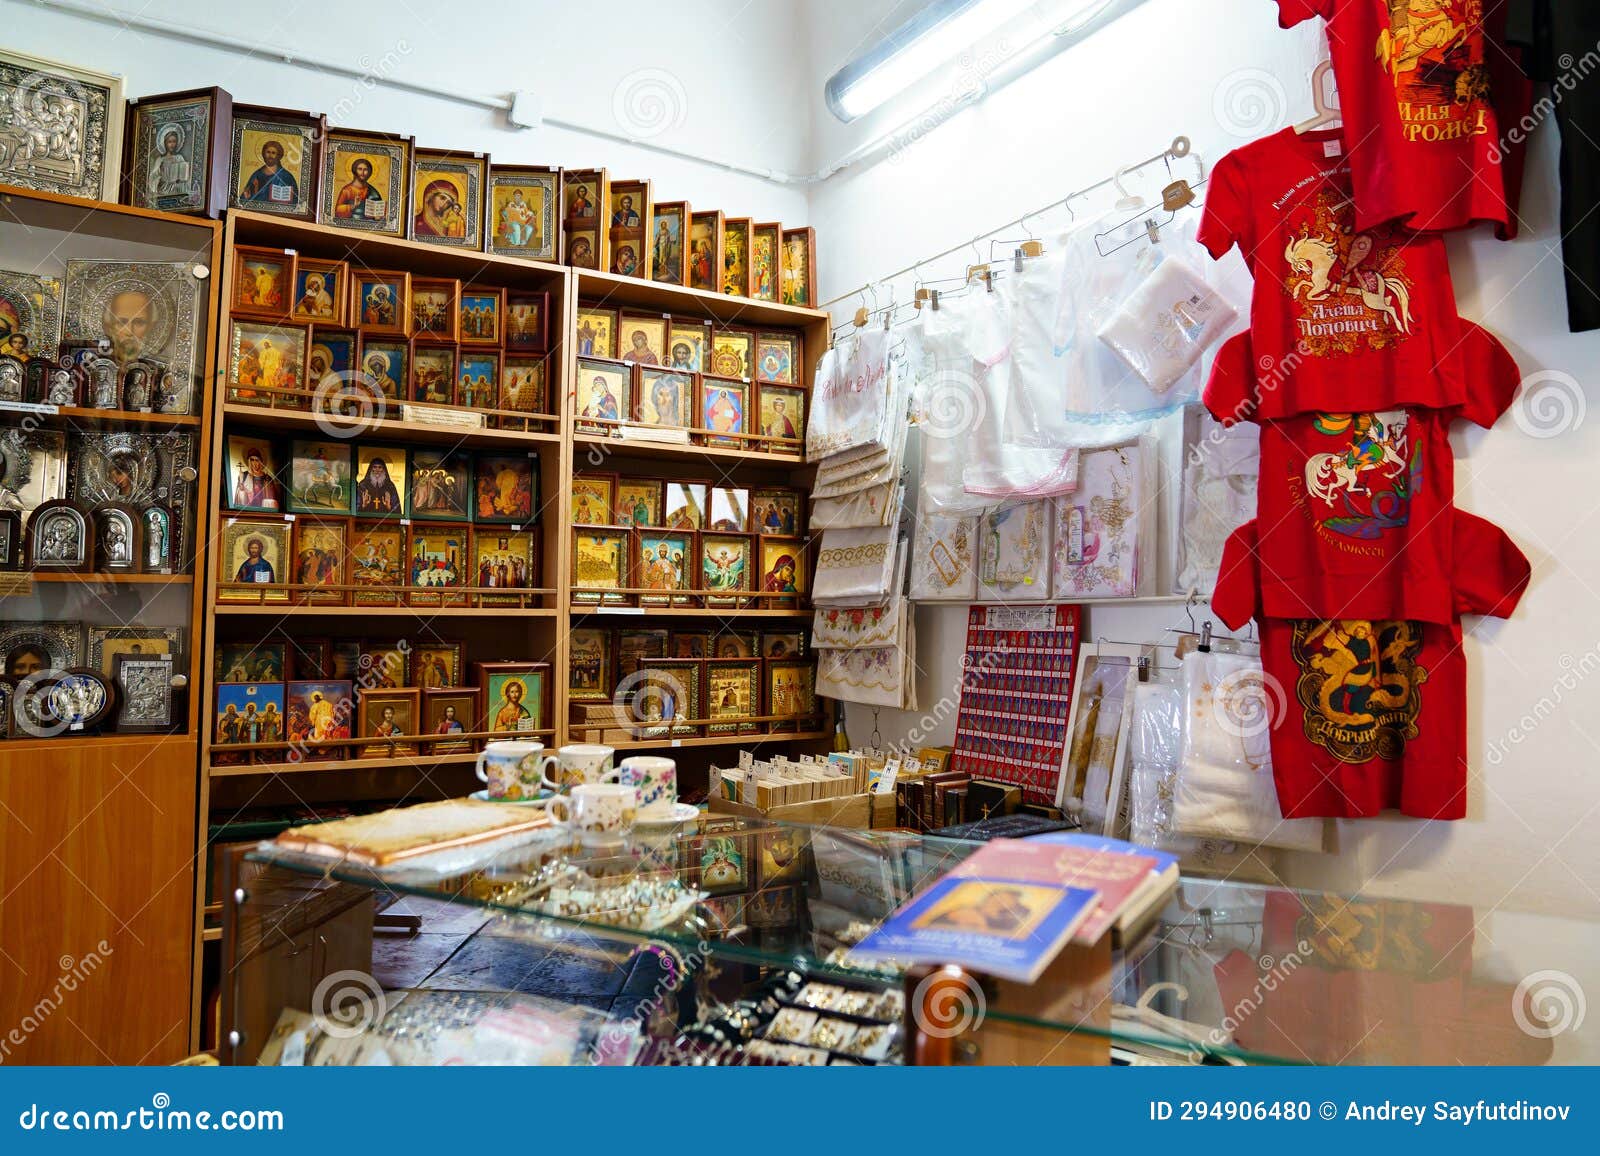 A Church Shop with Icons and Religious Paraphernalia. Editorial Image ...